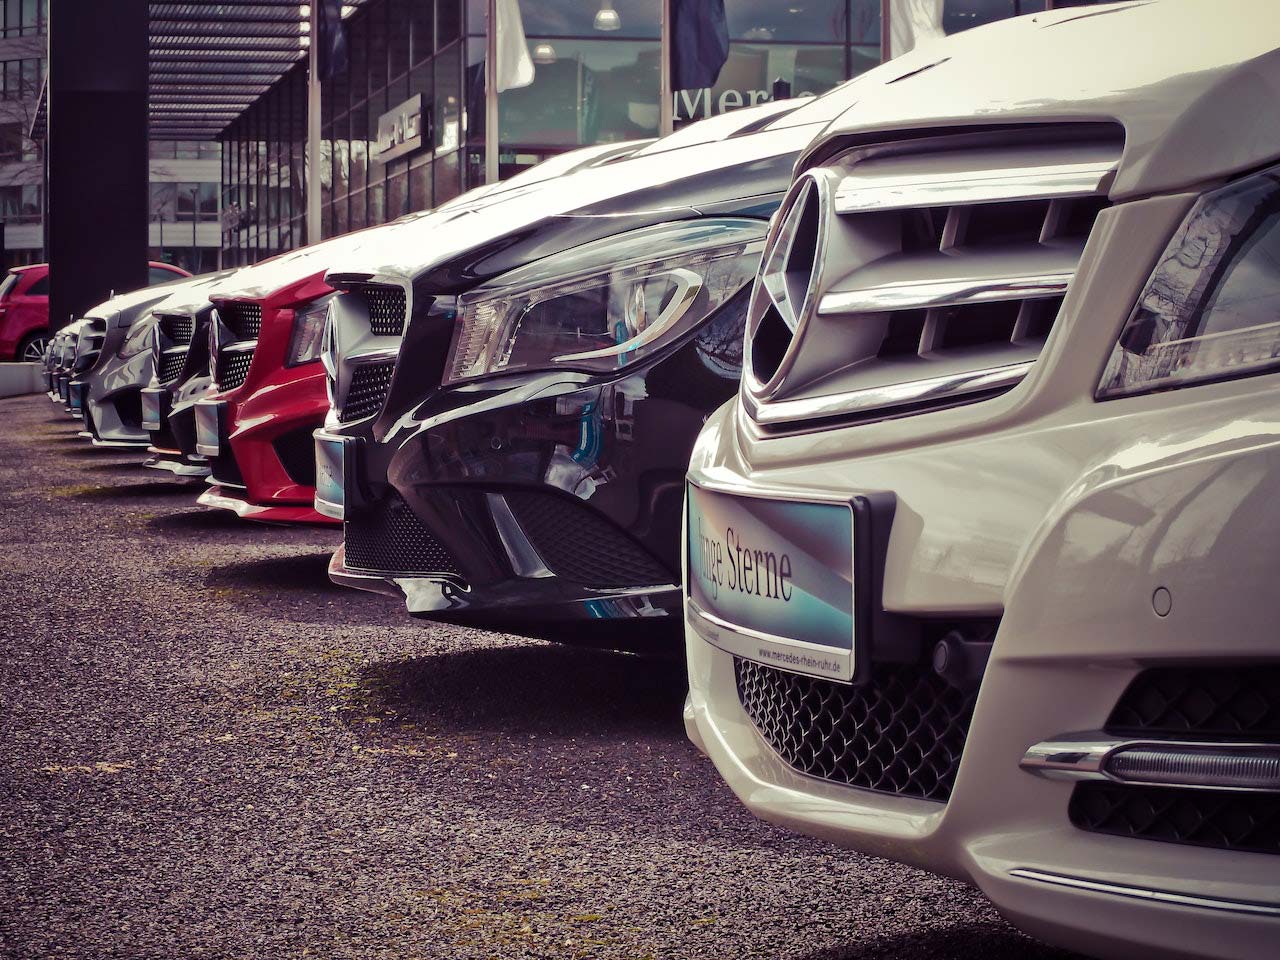 The Importance Of Vehicle History Checks When Buying A Used Car - Zigverve